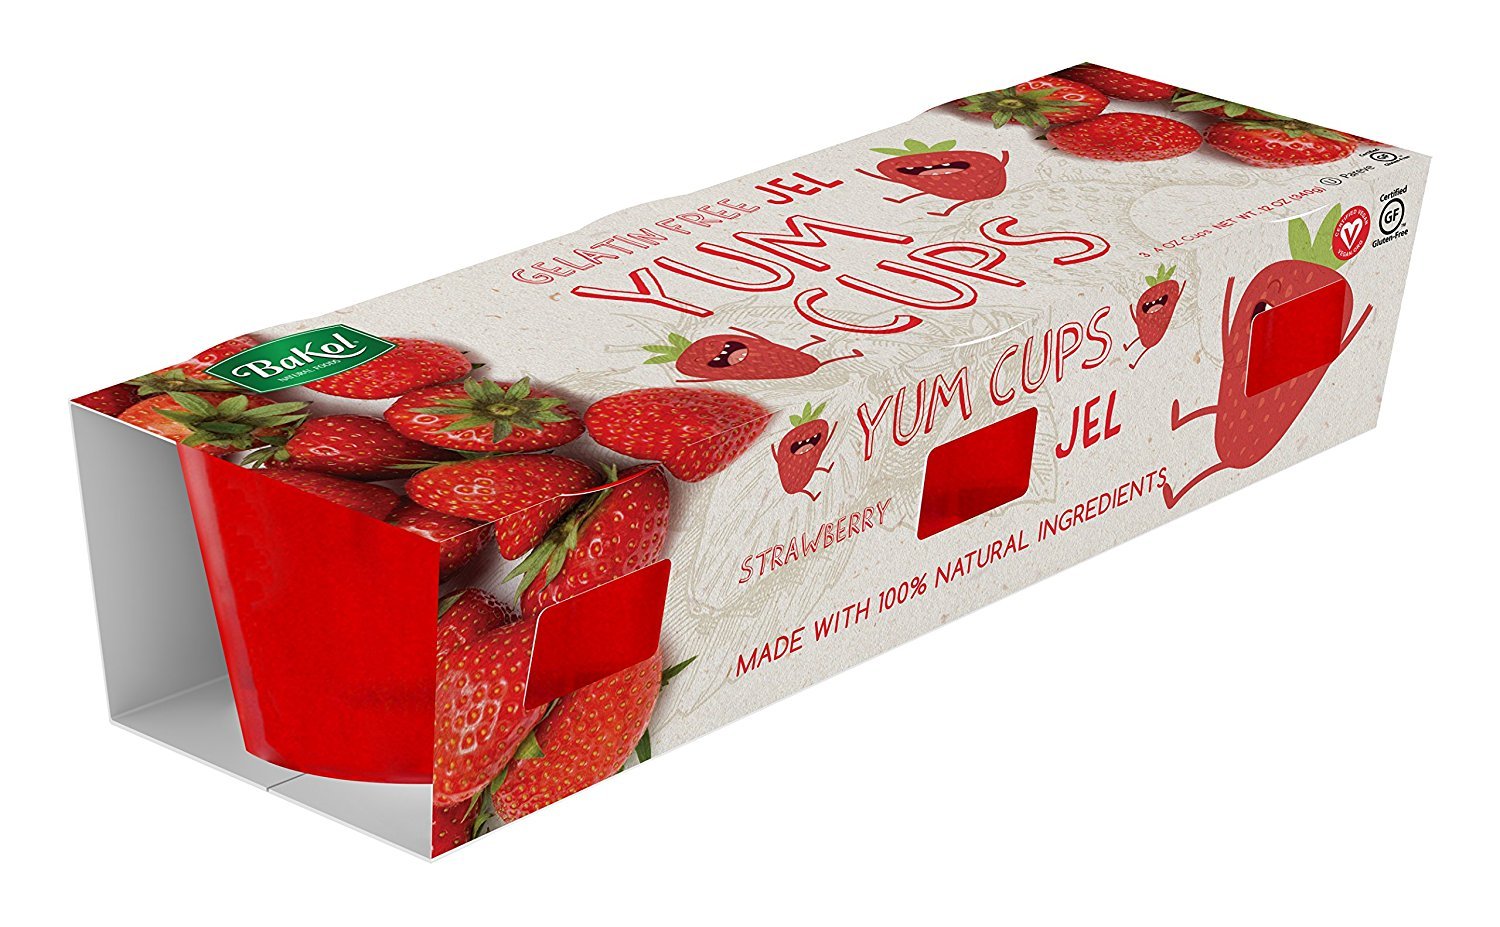 BAKOL: All Natural Yum Cups Strawberry Jel, 12 oz - Vending Business Solutions